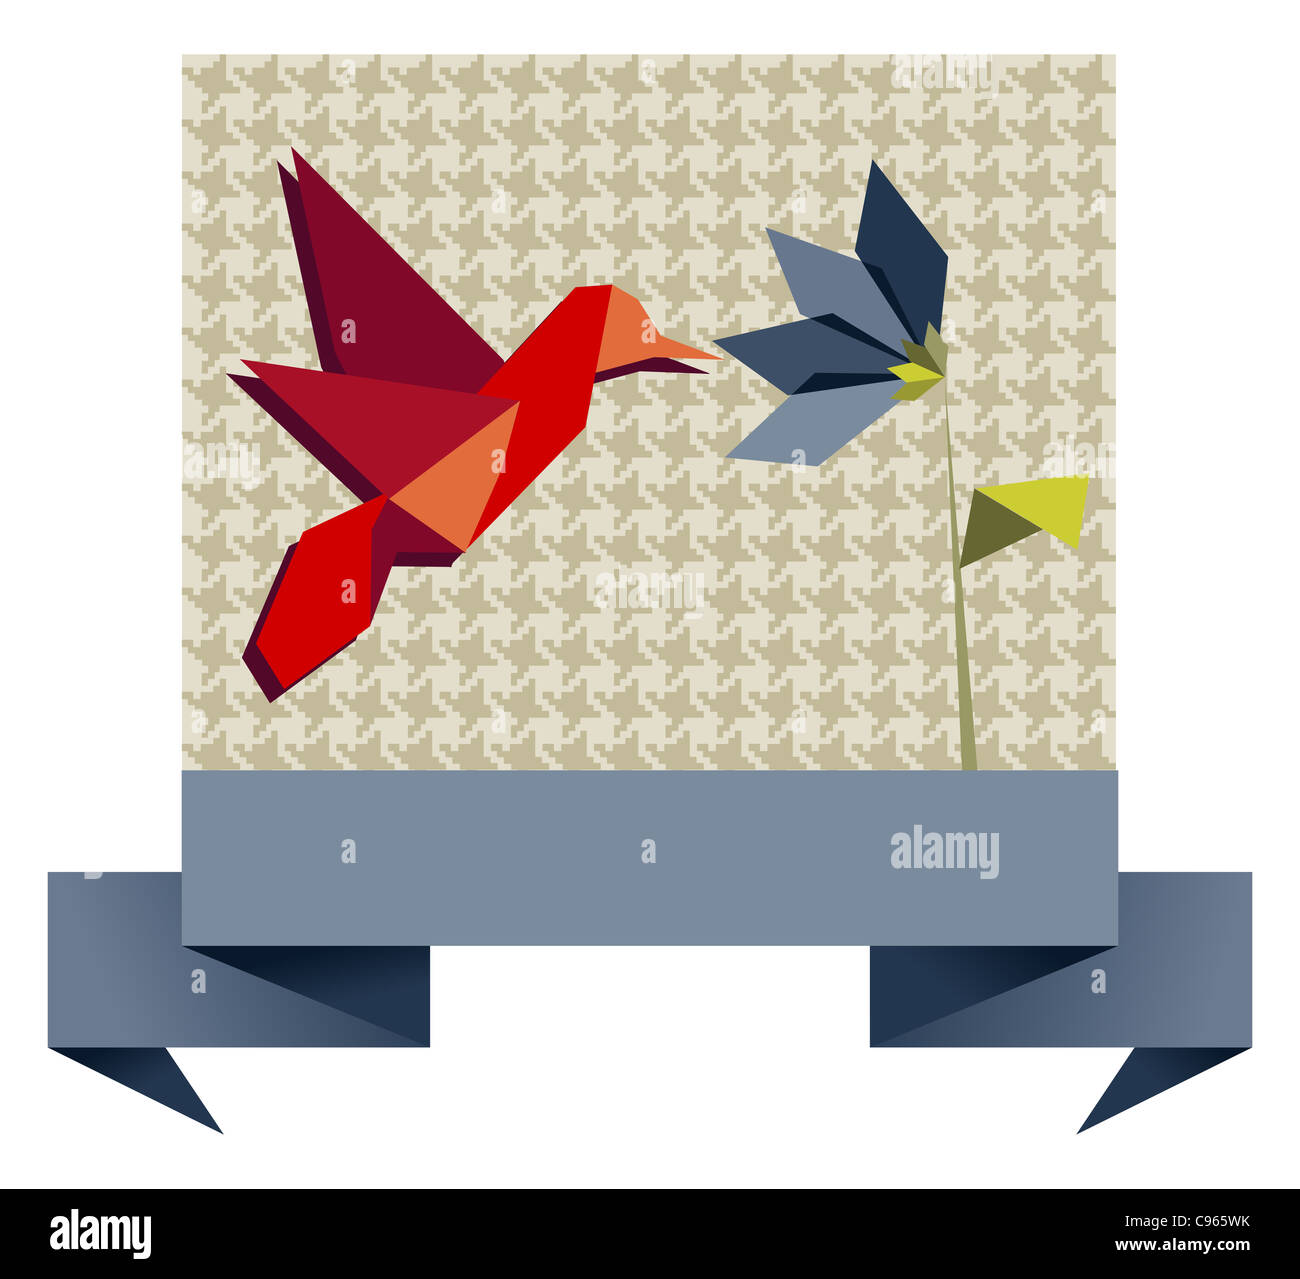 Single Origami hummingbird over textile seamless pattern background. Vector file available. Stock Photo